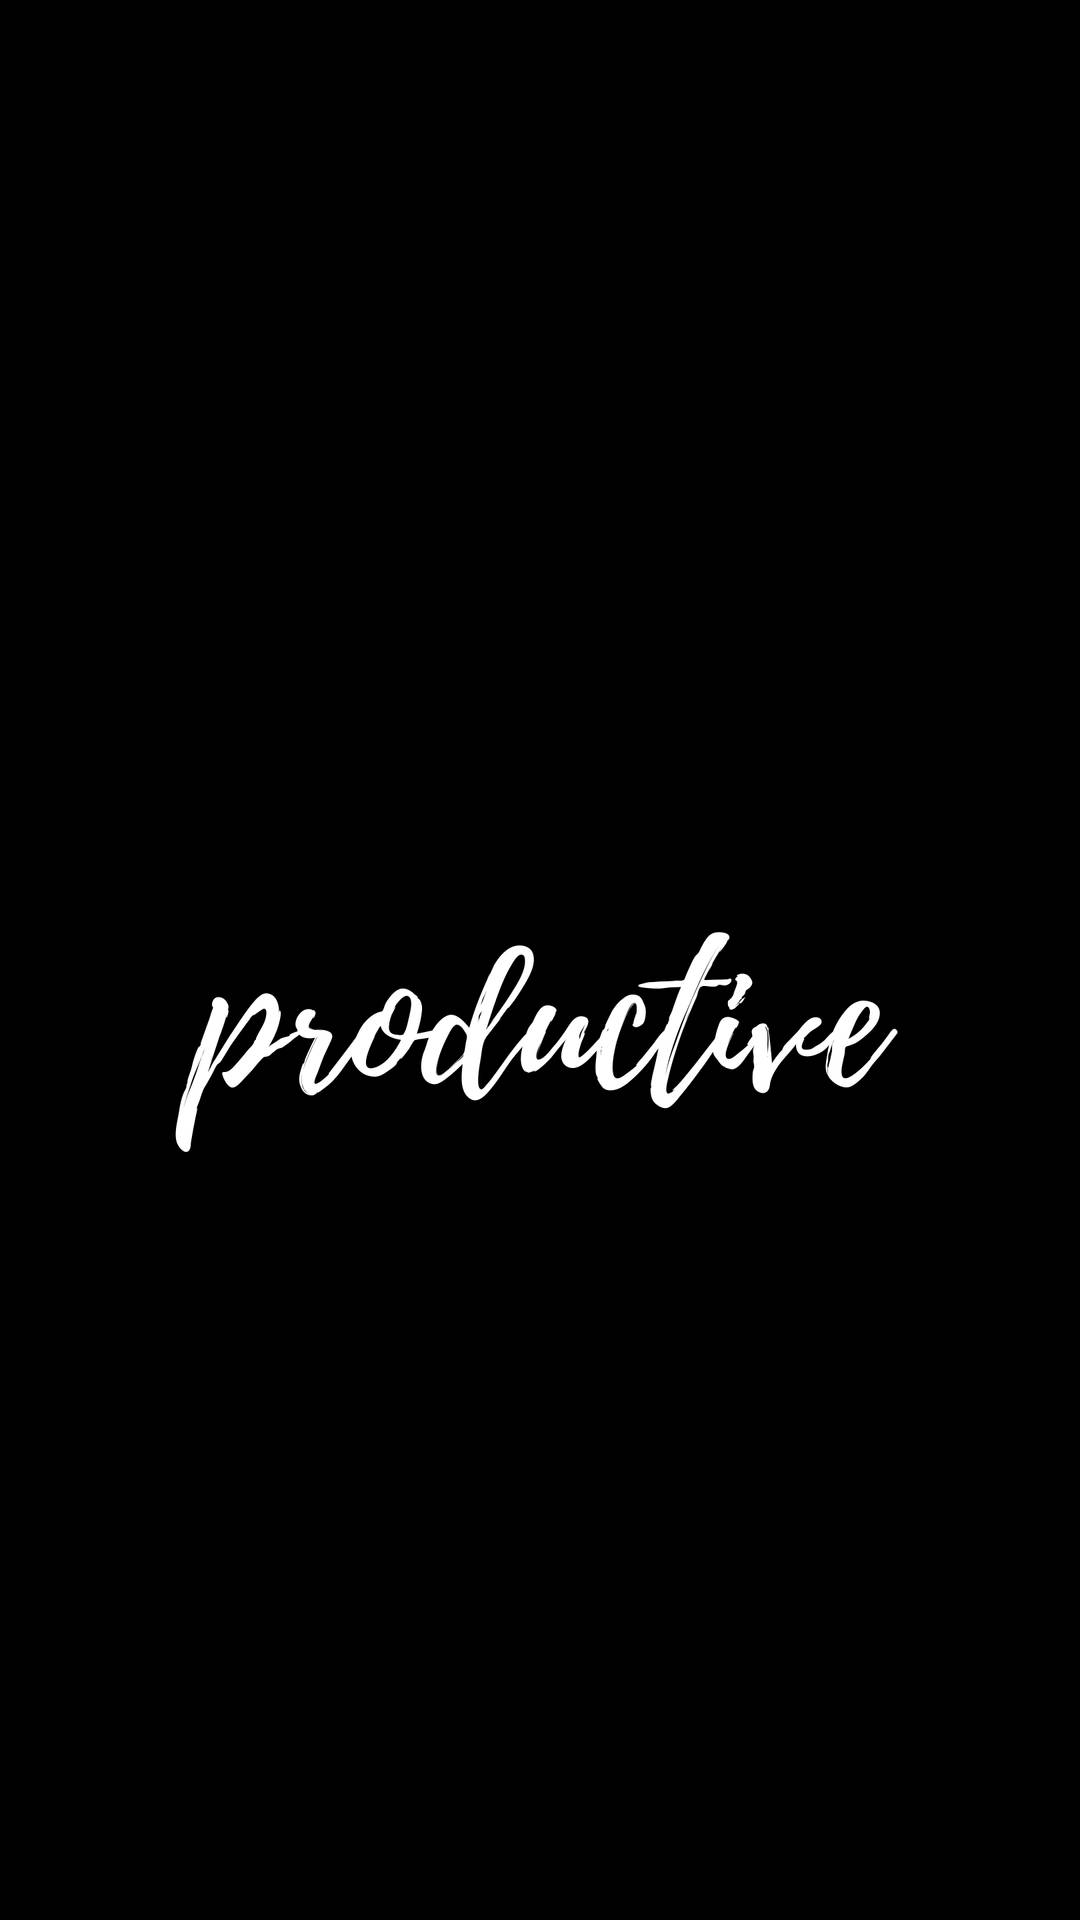 Productive Motivational Word Lettering Background